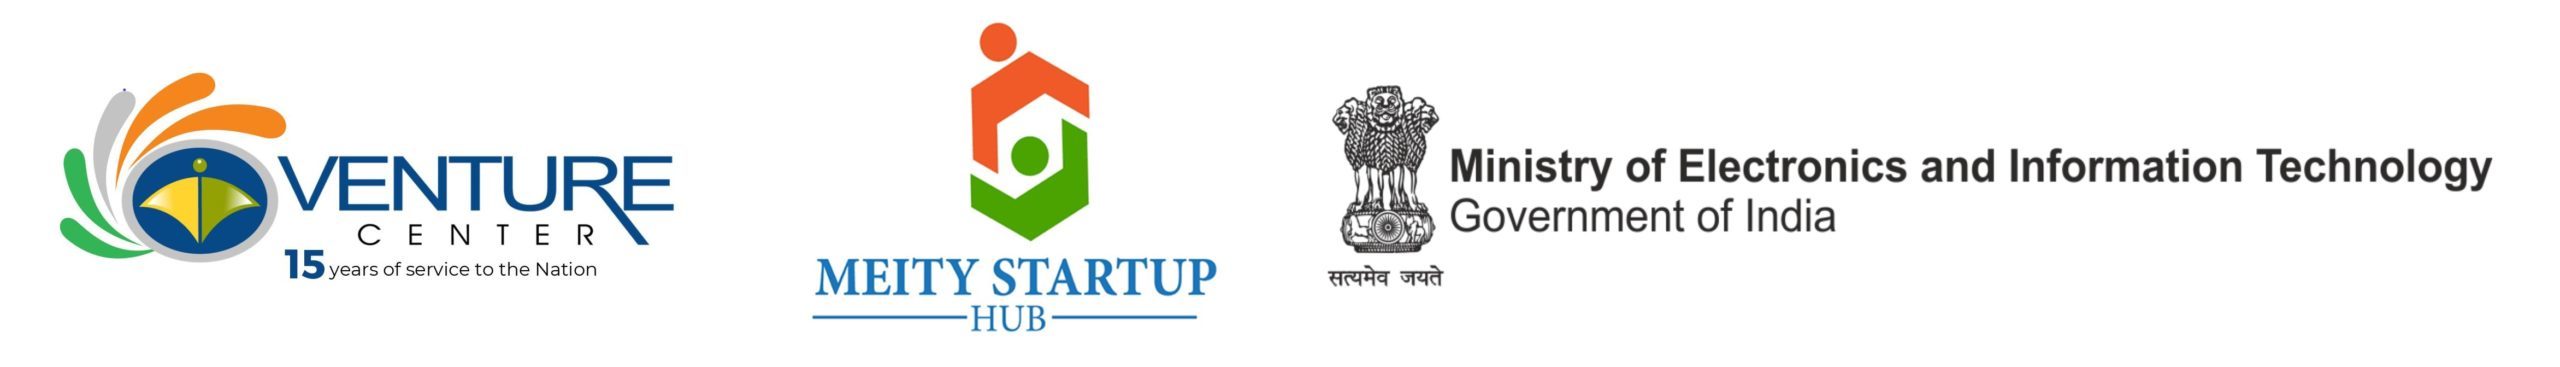 MeitY Startup Hub initiatives at Venture Center